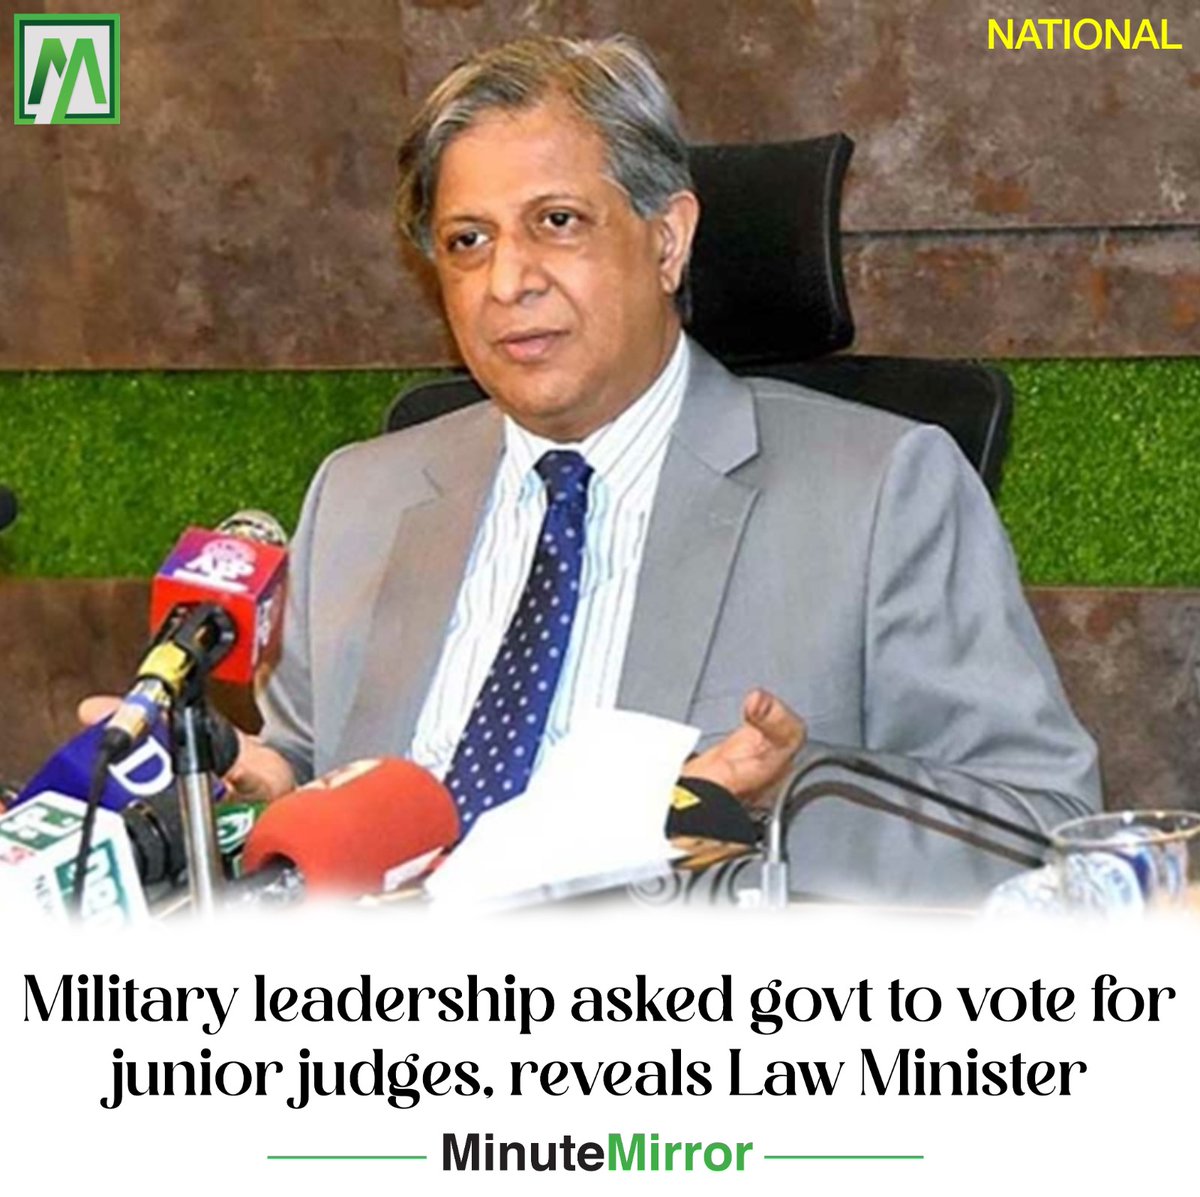 Azam Nazir Tarar, while talking in a TV program, said that only the top leadership could answer upon the discussion between the #government and the #militaryleadership in this regard. He said that he was not part of that conversation. minutemirror.com.pk/military-leade… @AzamNazeerTarar